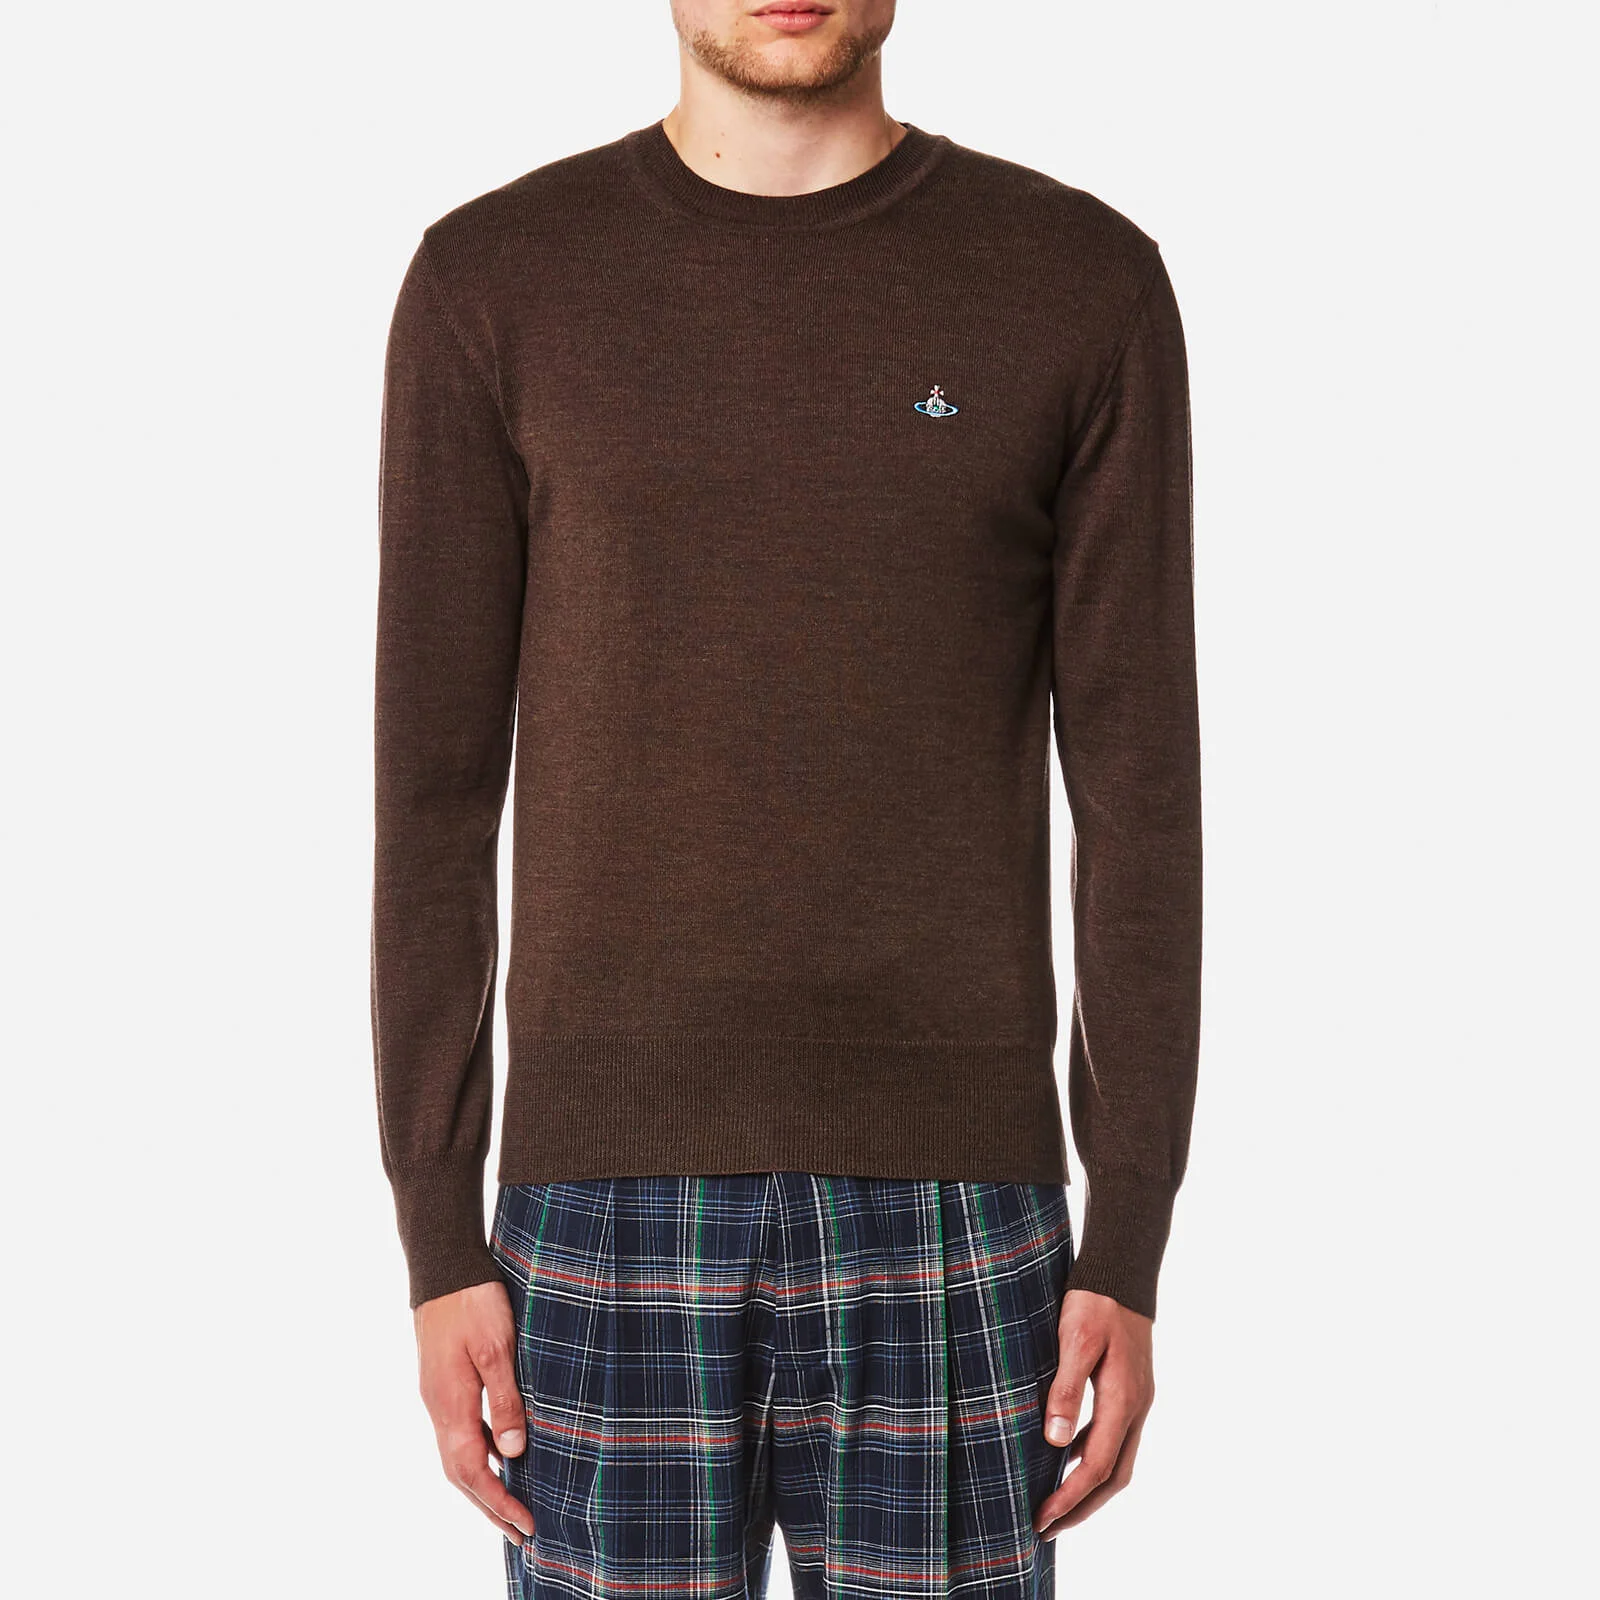 Vivienne Westwood Men's Classic Crew Neck Knitted Jumper - Brown Image 1